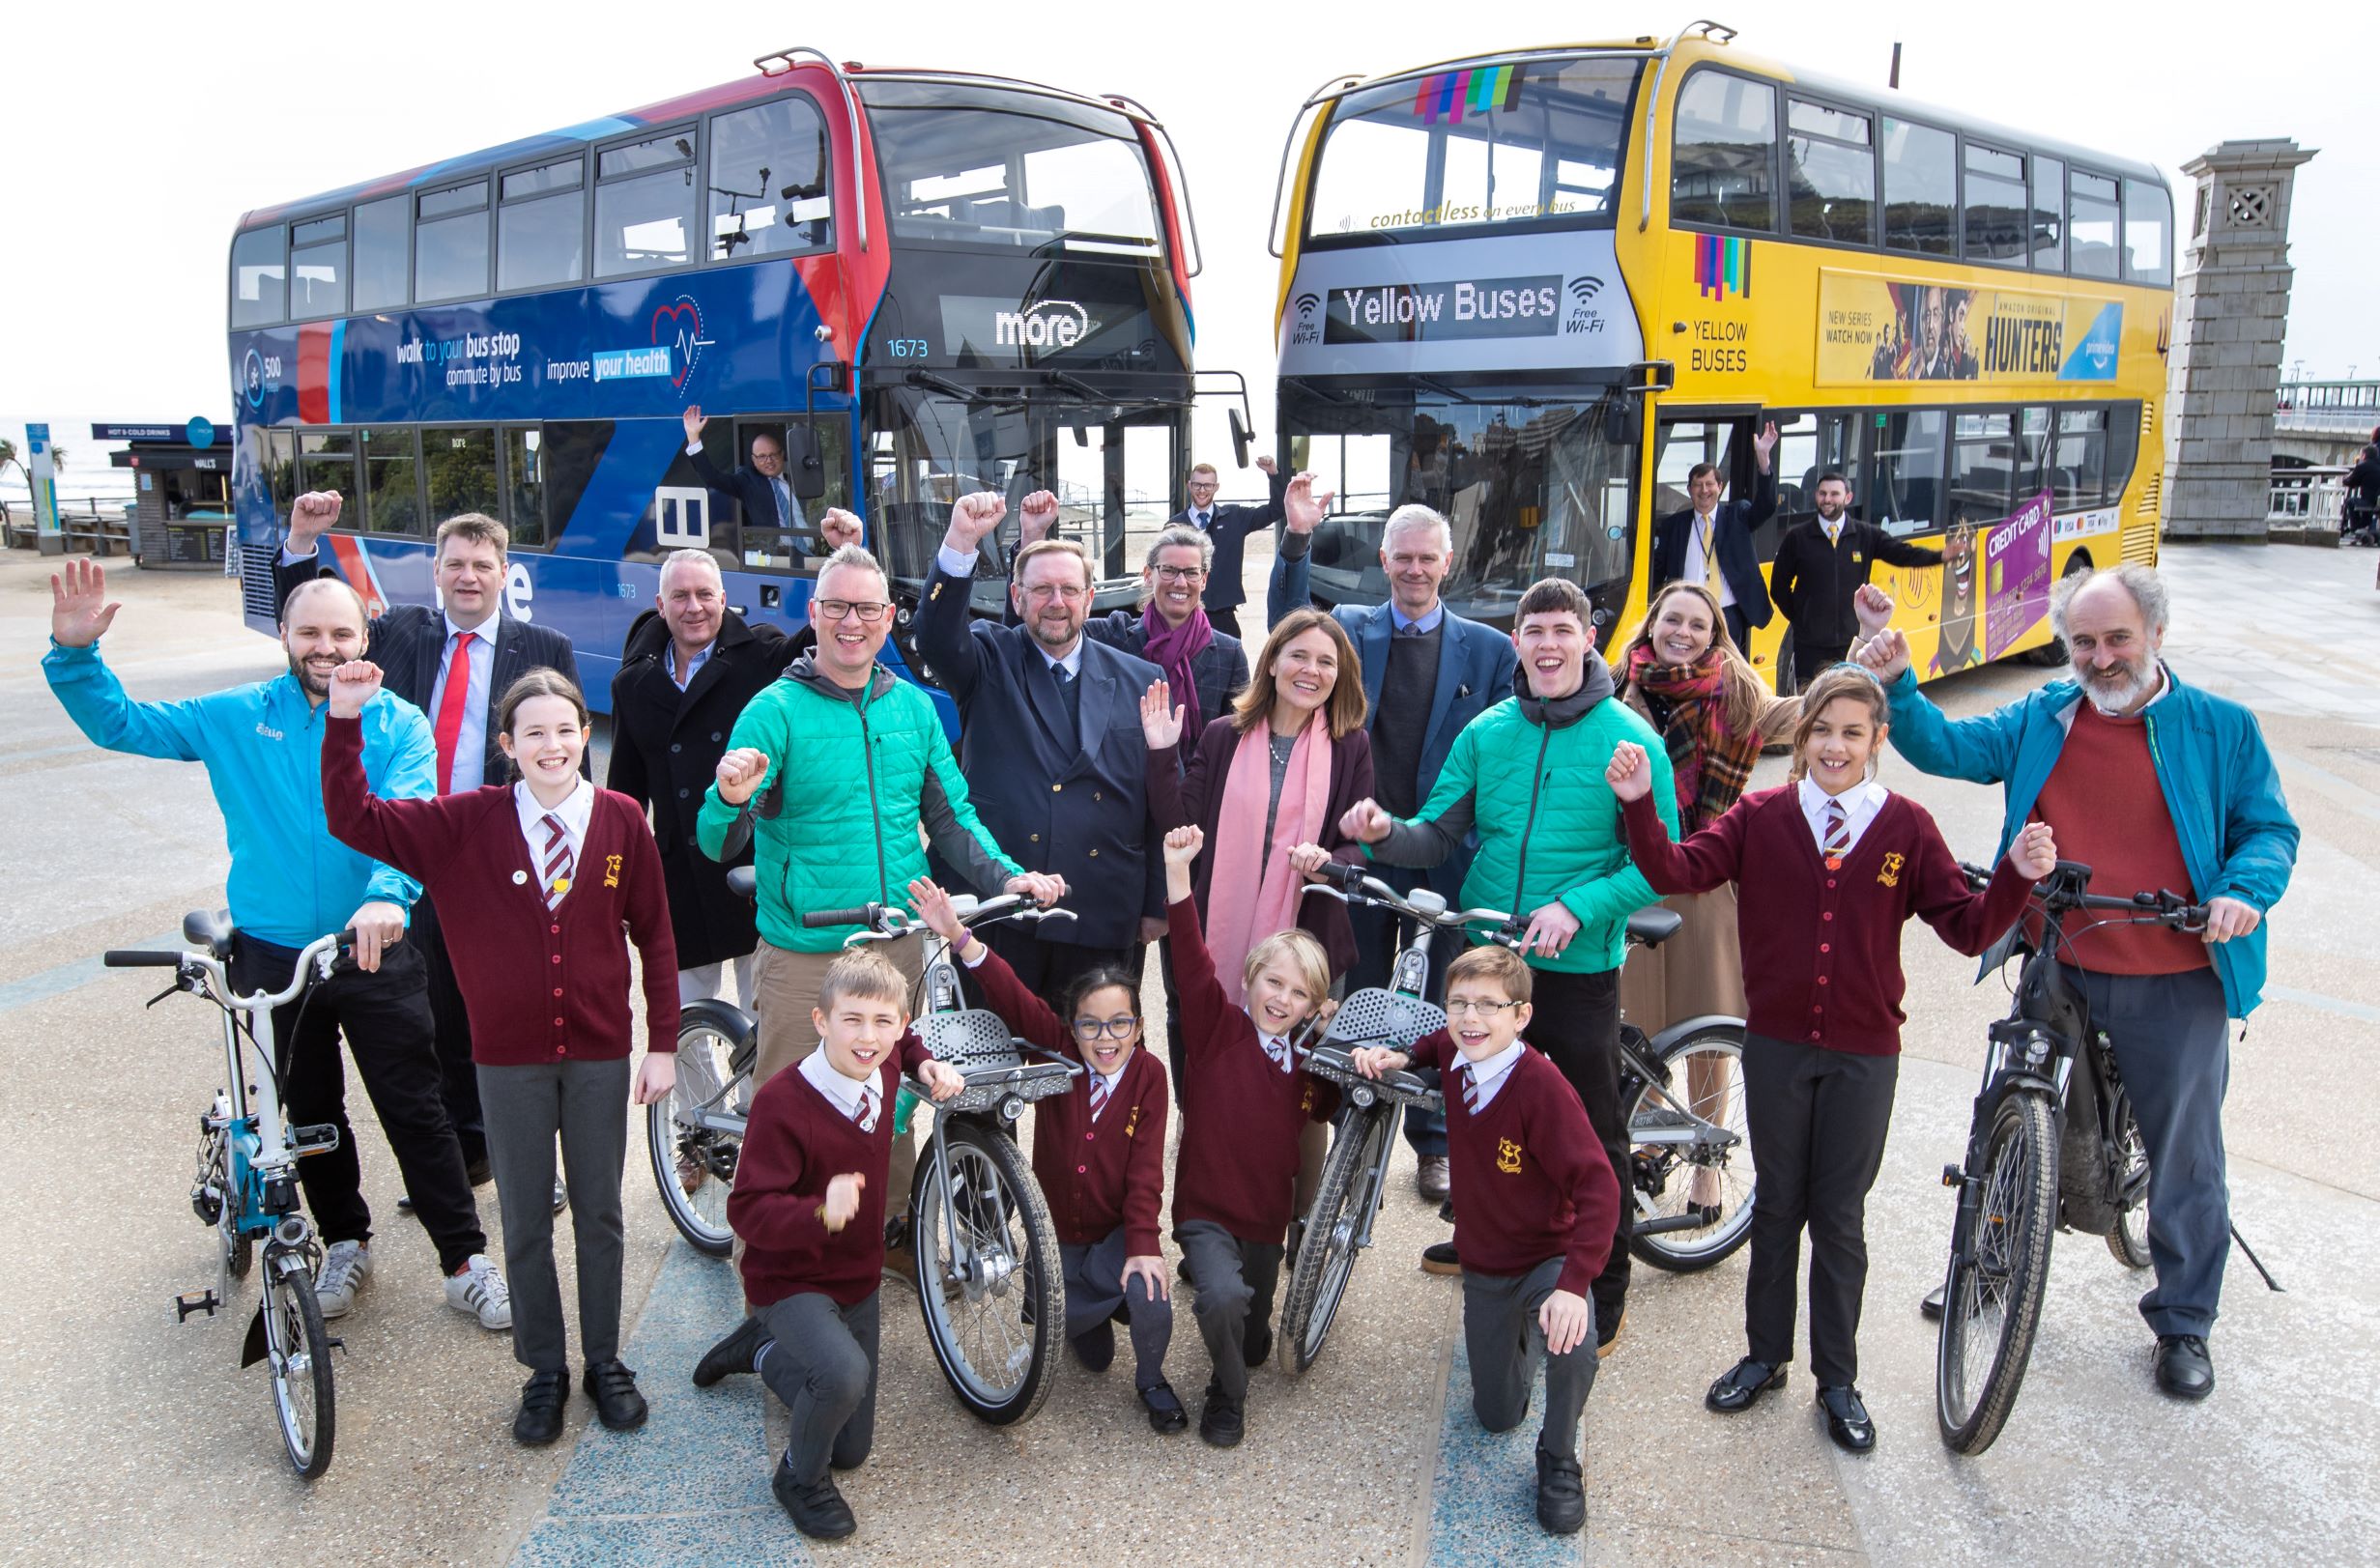 A joint bid by Bournemouth, Christchurch and Poole Council (BCP Council) and Dorset Council, has been awarded £79 million by the Department for Transport’s Transforming Cities Fund (TCF).